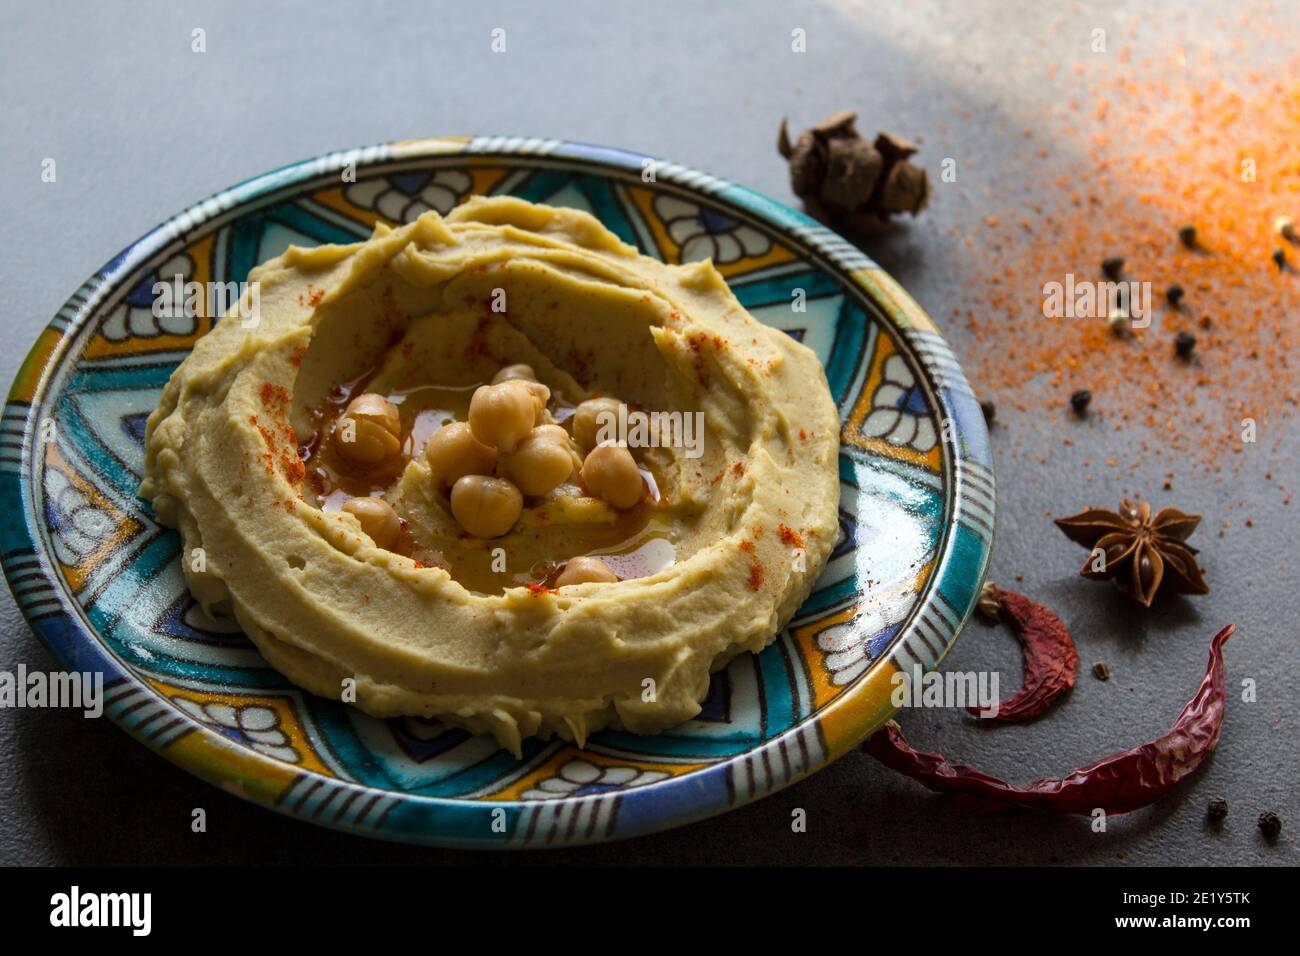 Close up photo of fresh homemade hummus on colorful ceramic plate. Balanced meal photo. Healthy eating concept. Authentic food of Middle East. Stock Photo